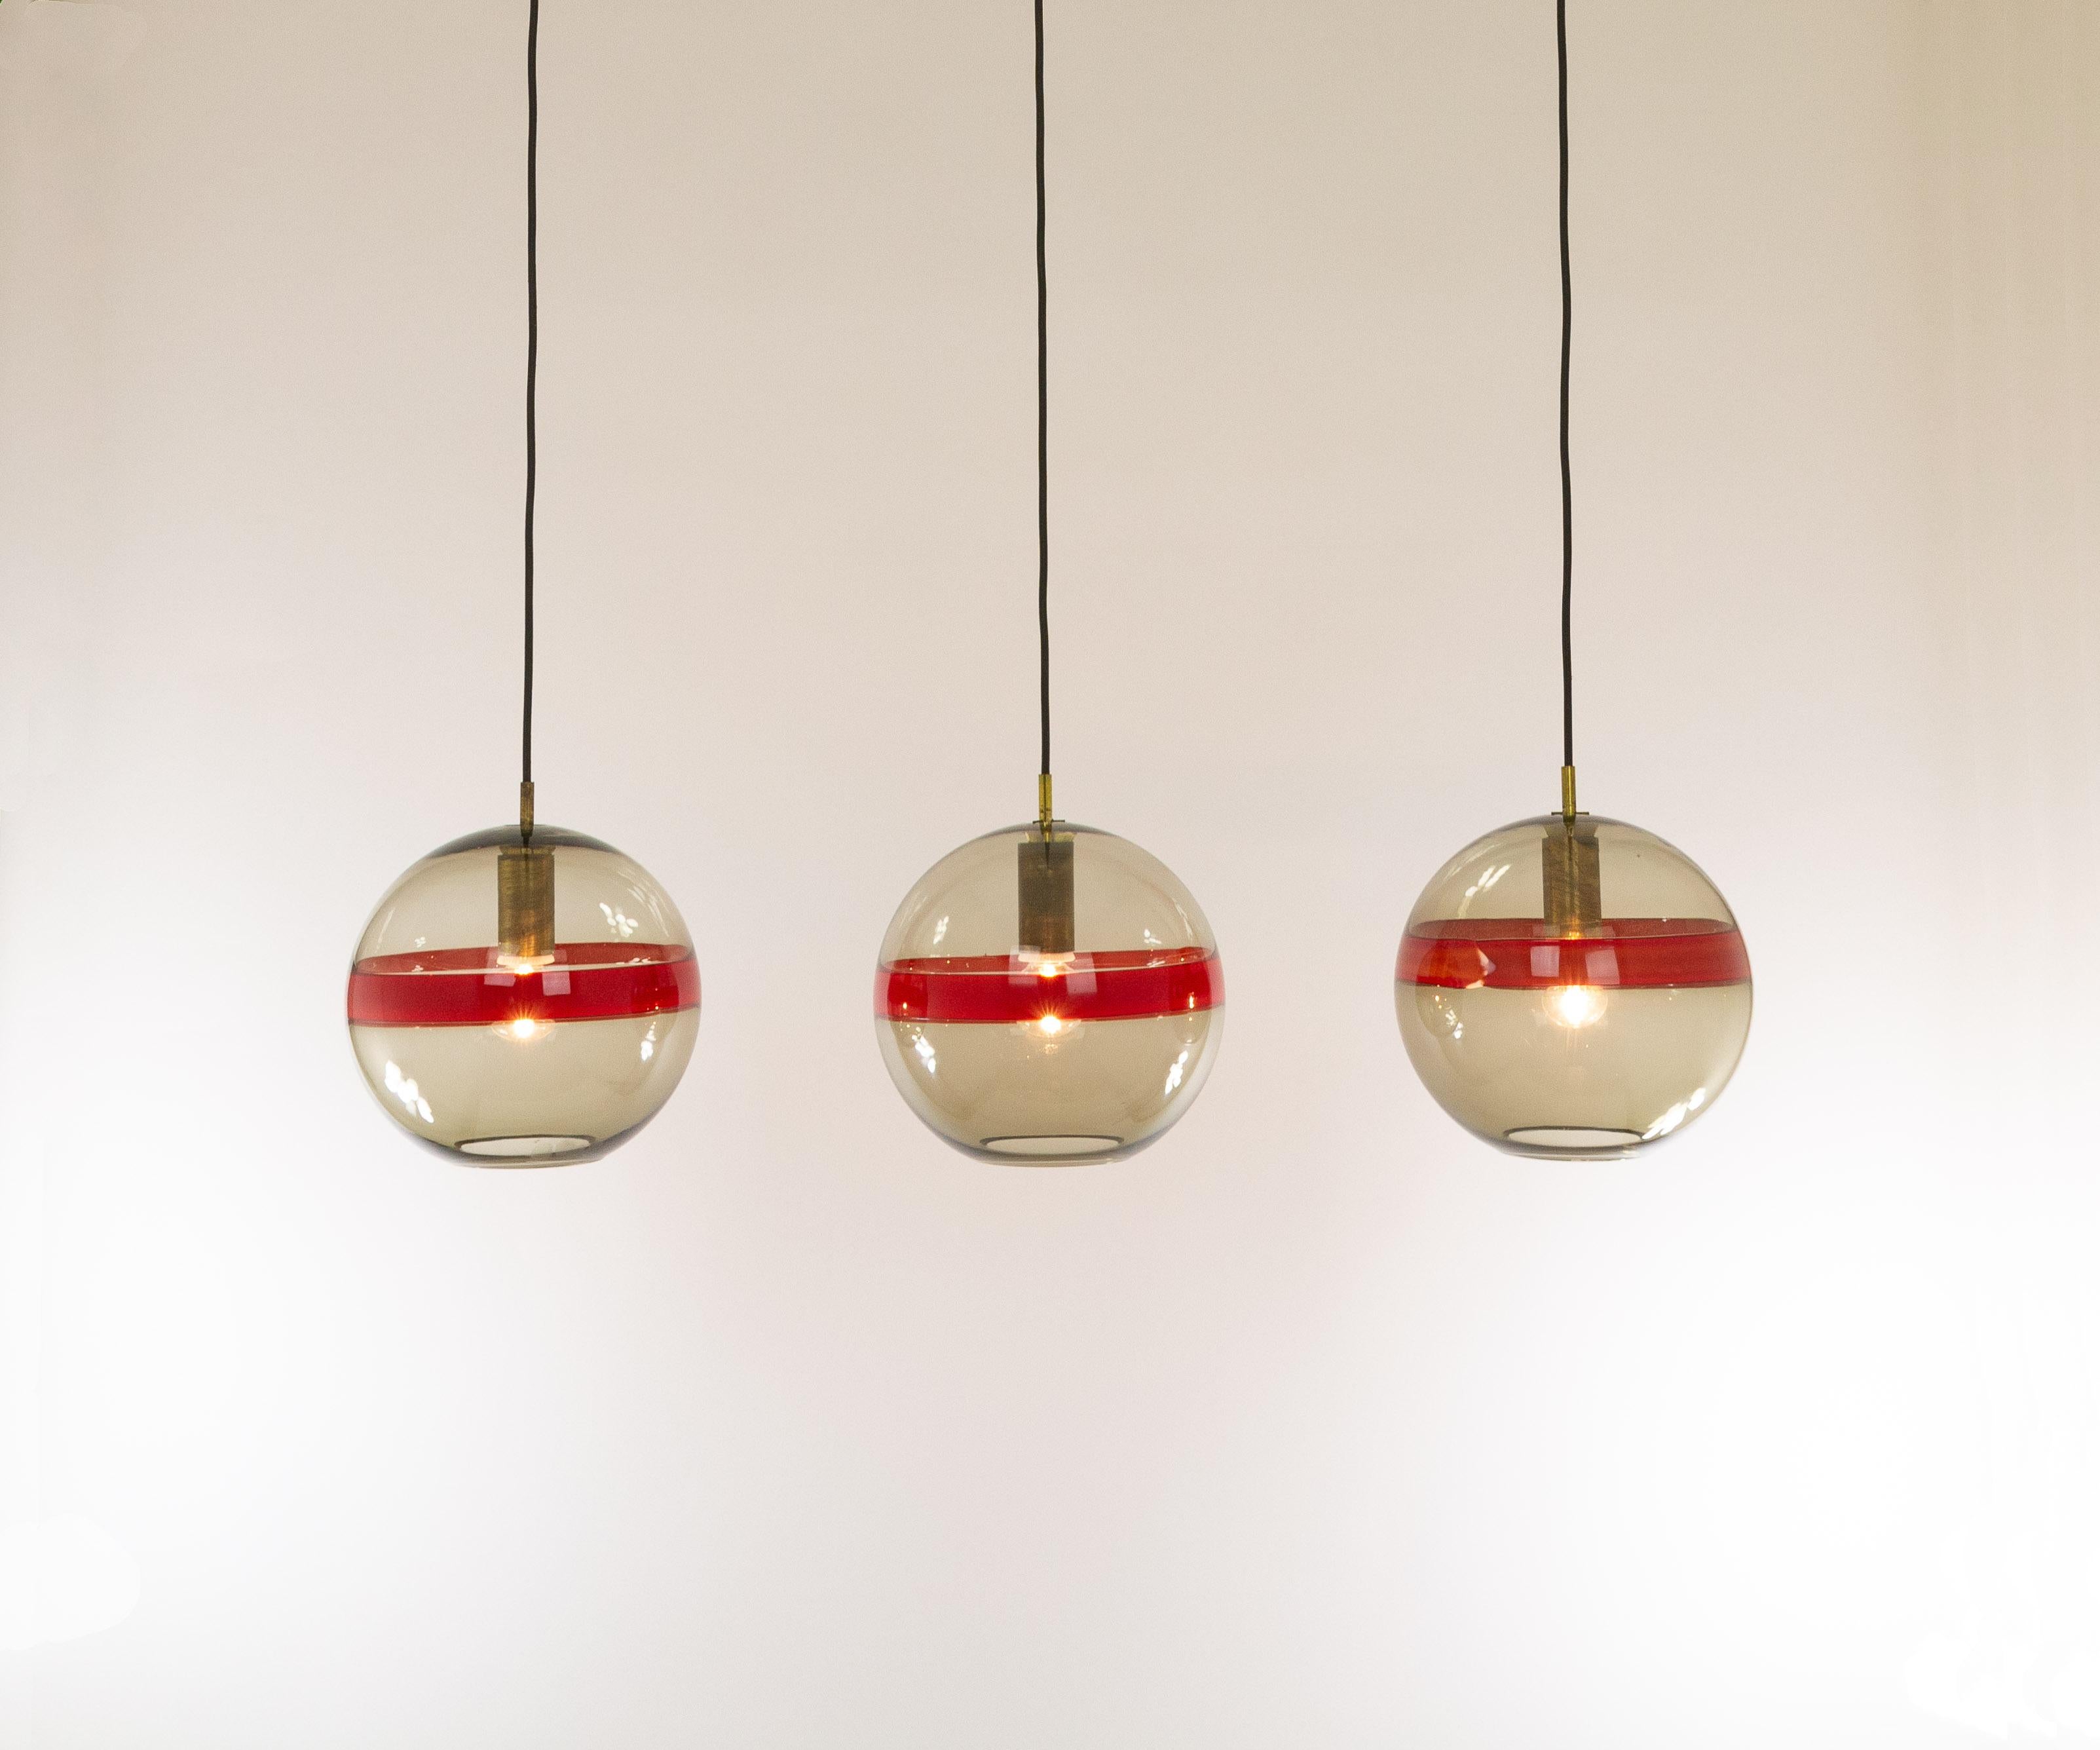 Set of three Murano glass pendants model 5199 by Ludovico Diaz de Santillana for Venini, produced in the 1960s.

The lamps are made of smoked glass with a red band in the middle. They are handmade and therefore the color of the band is not